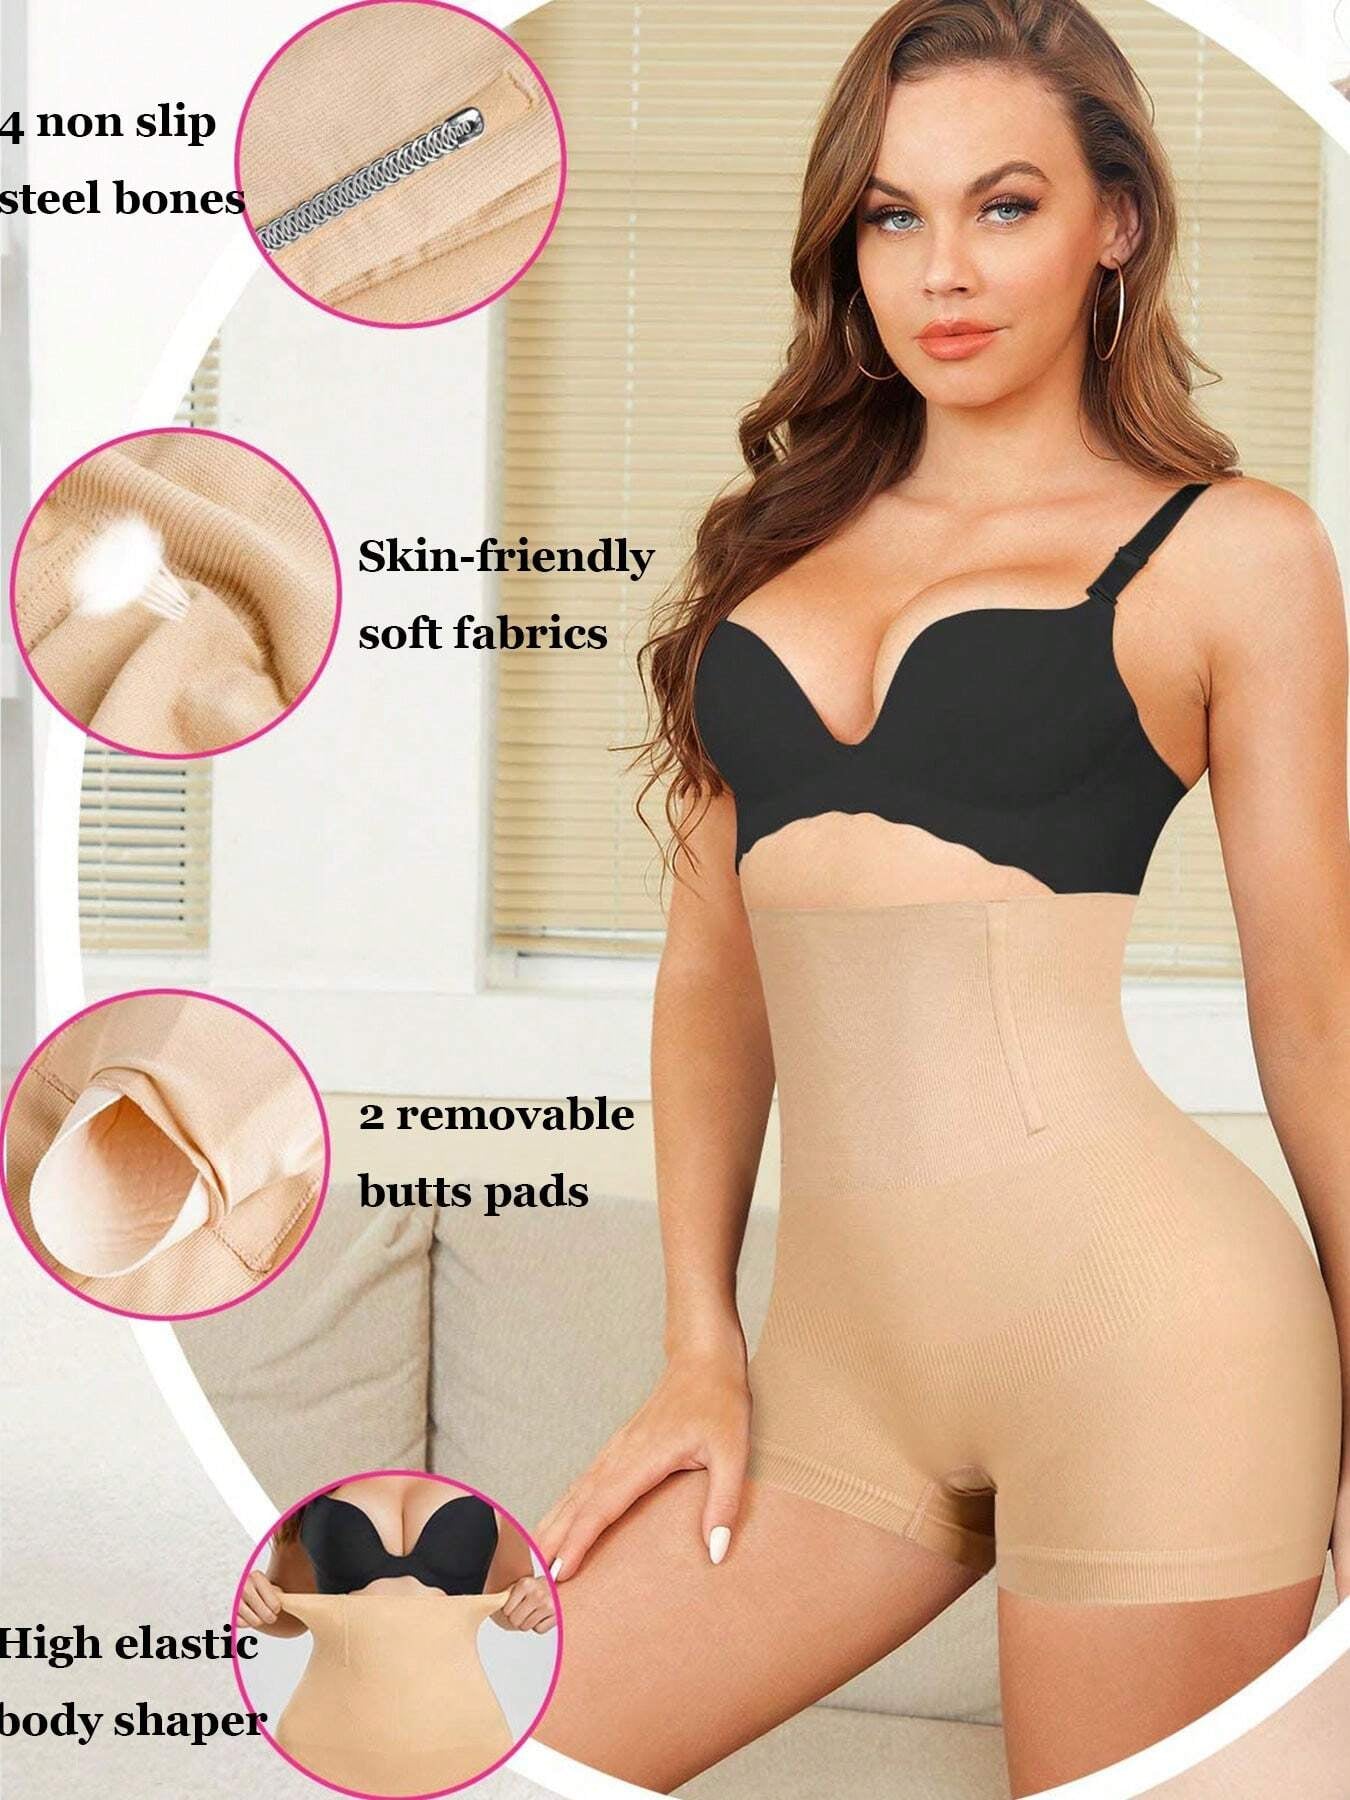 BRA FOR YOU®BUTT LIFTER PADDED SHAPEWEAR HIGH WAIST HIP TUMMY CONTROL PANTY